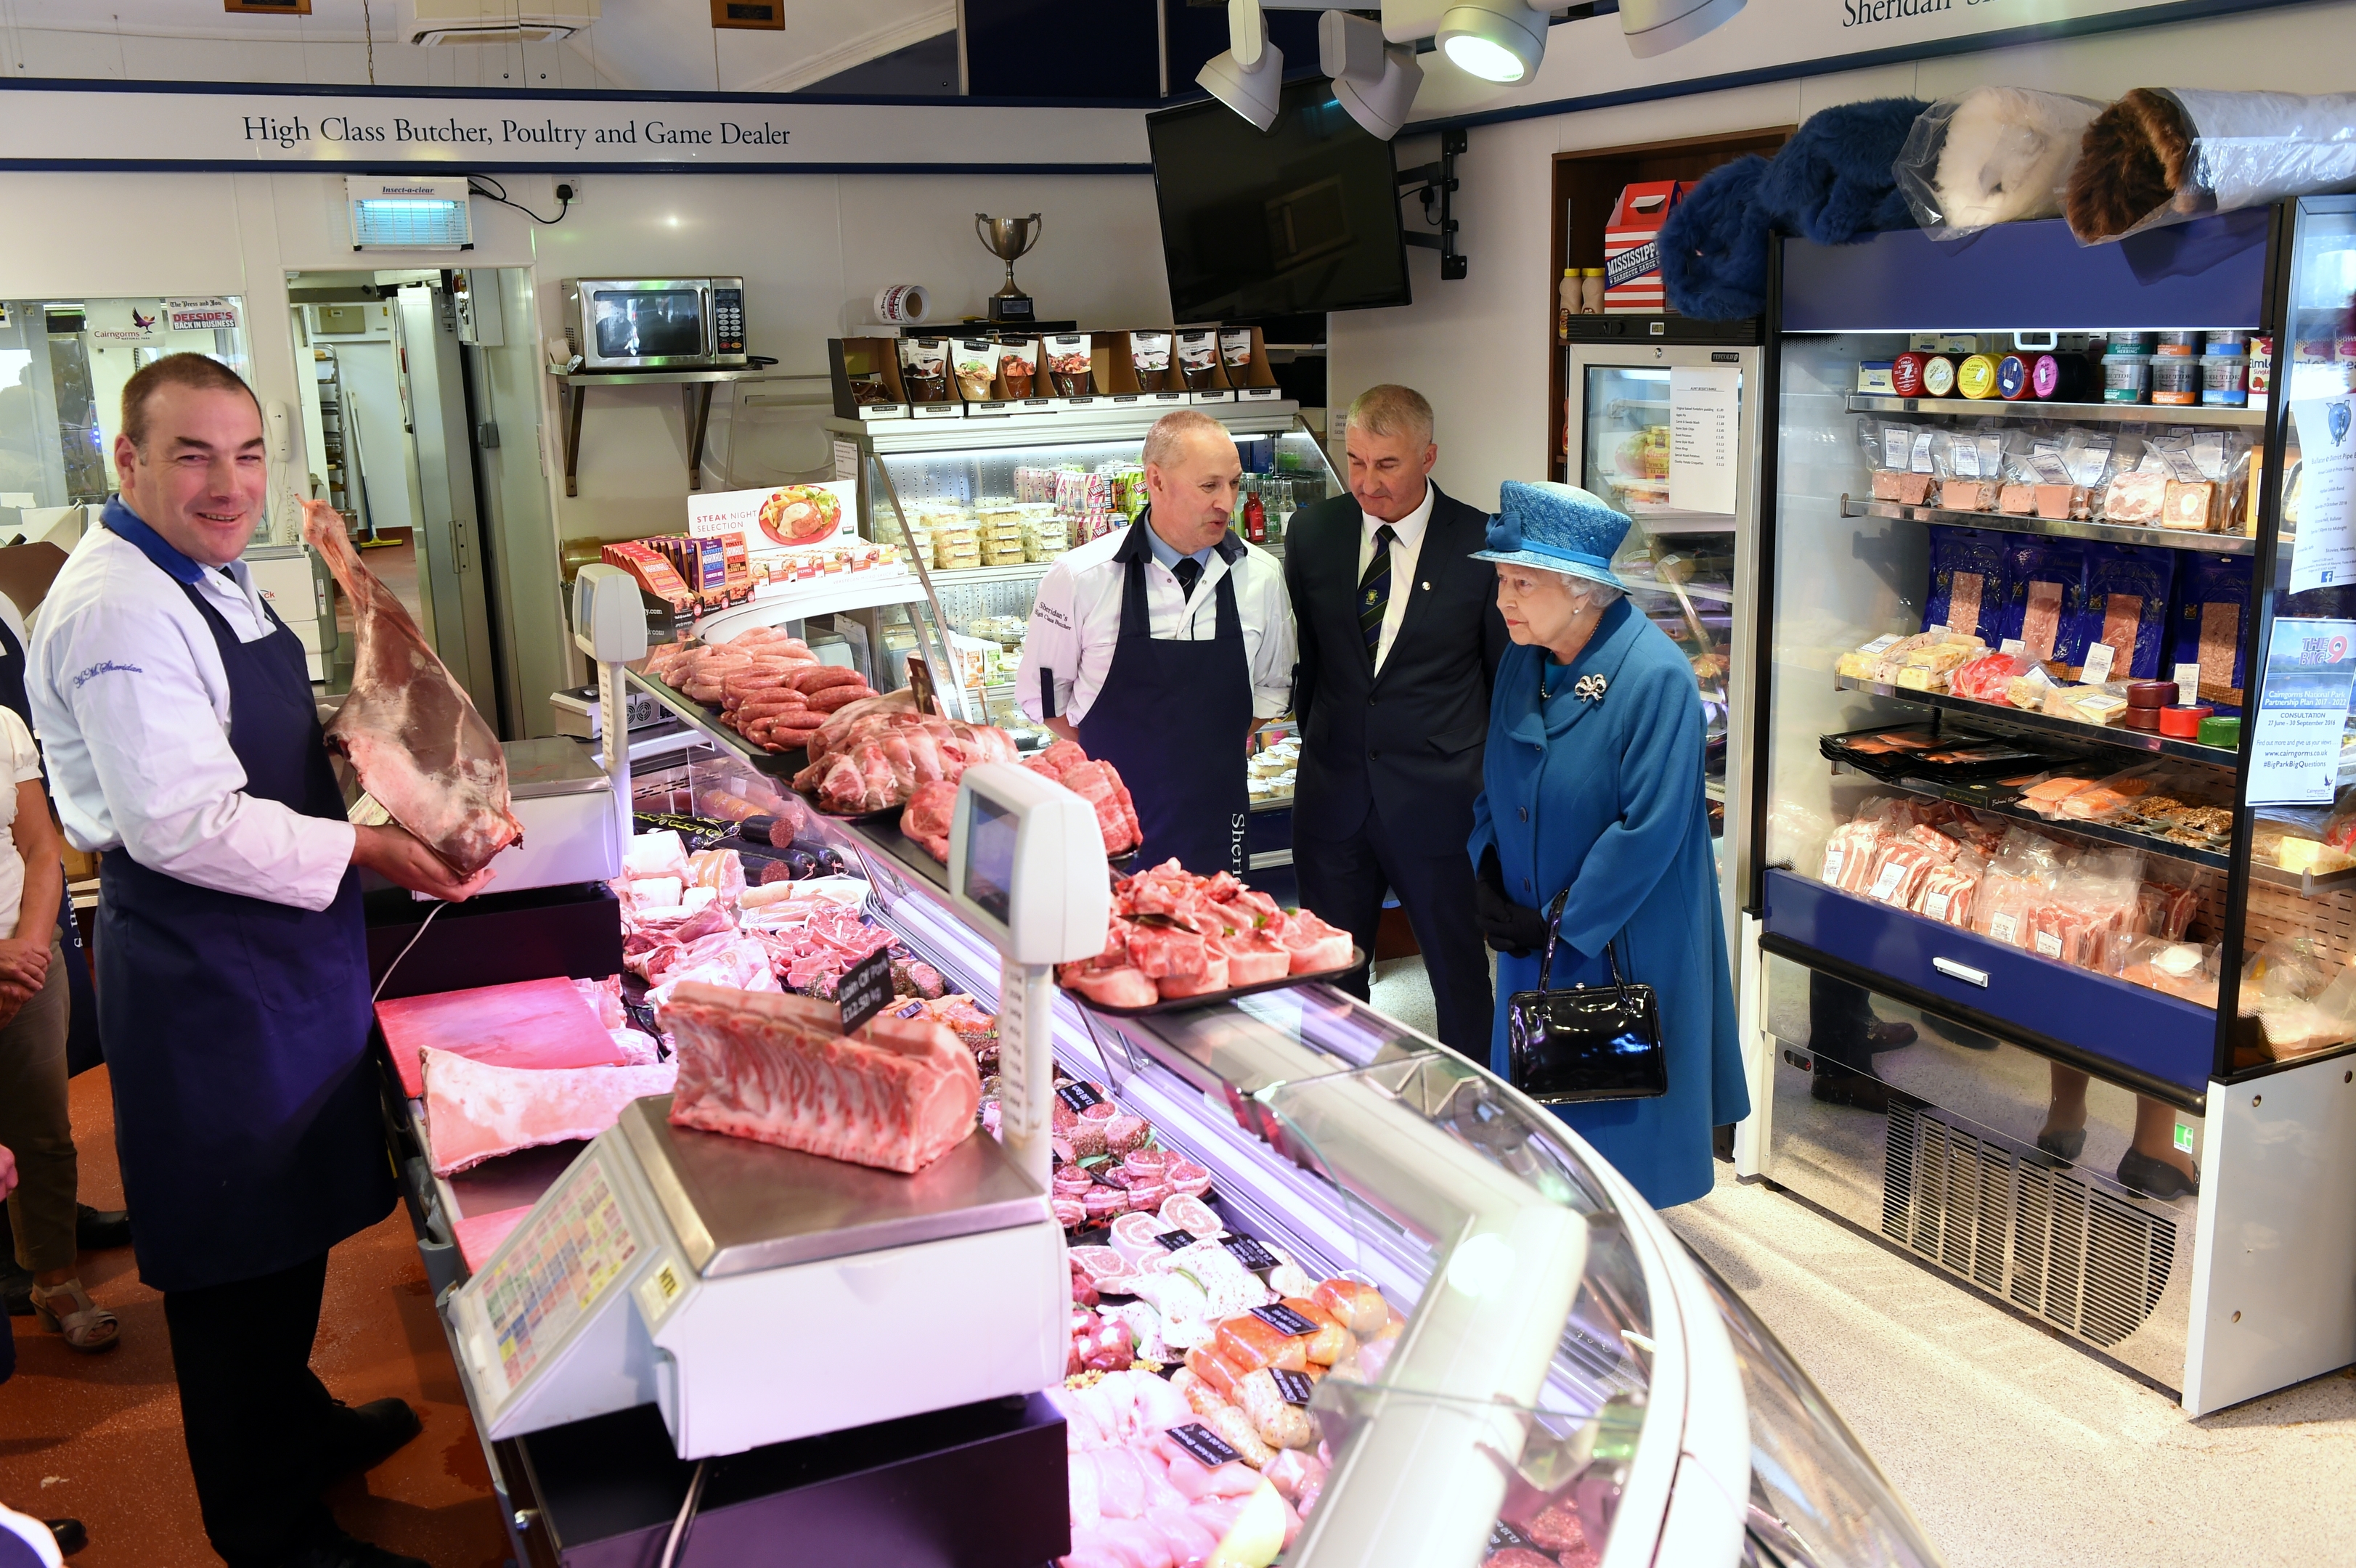 Her Majesty The Queen visits Ballater to meet members of the local community who's homes and livelihoods were affected by flooding during Storm Frank in 2016. Pictured at H.M. Sheridan butchers.  
Pictures by KEVIN EMSLIE